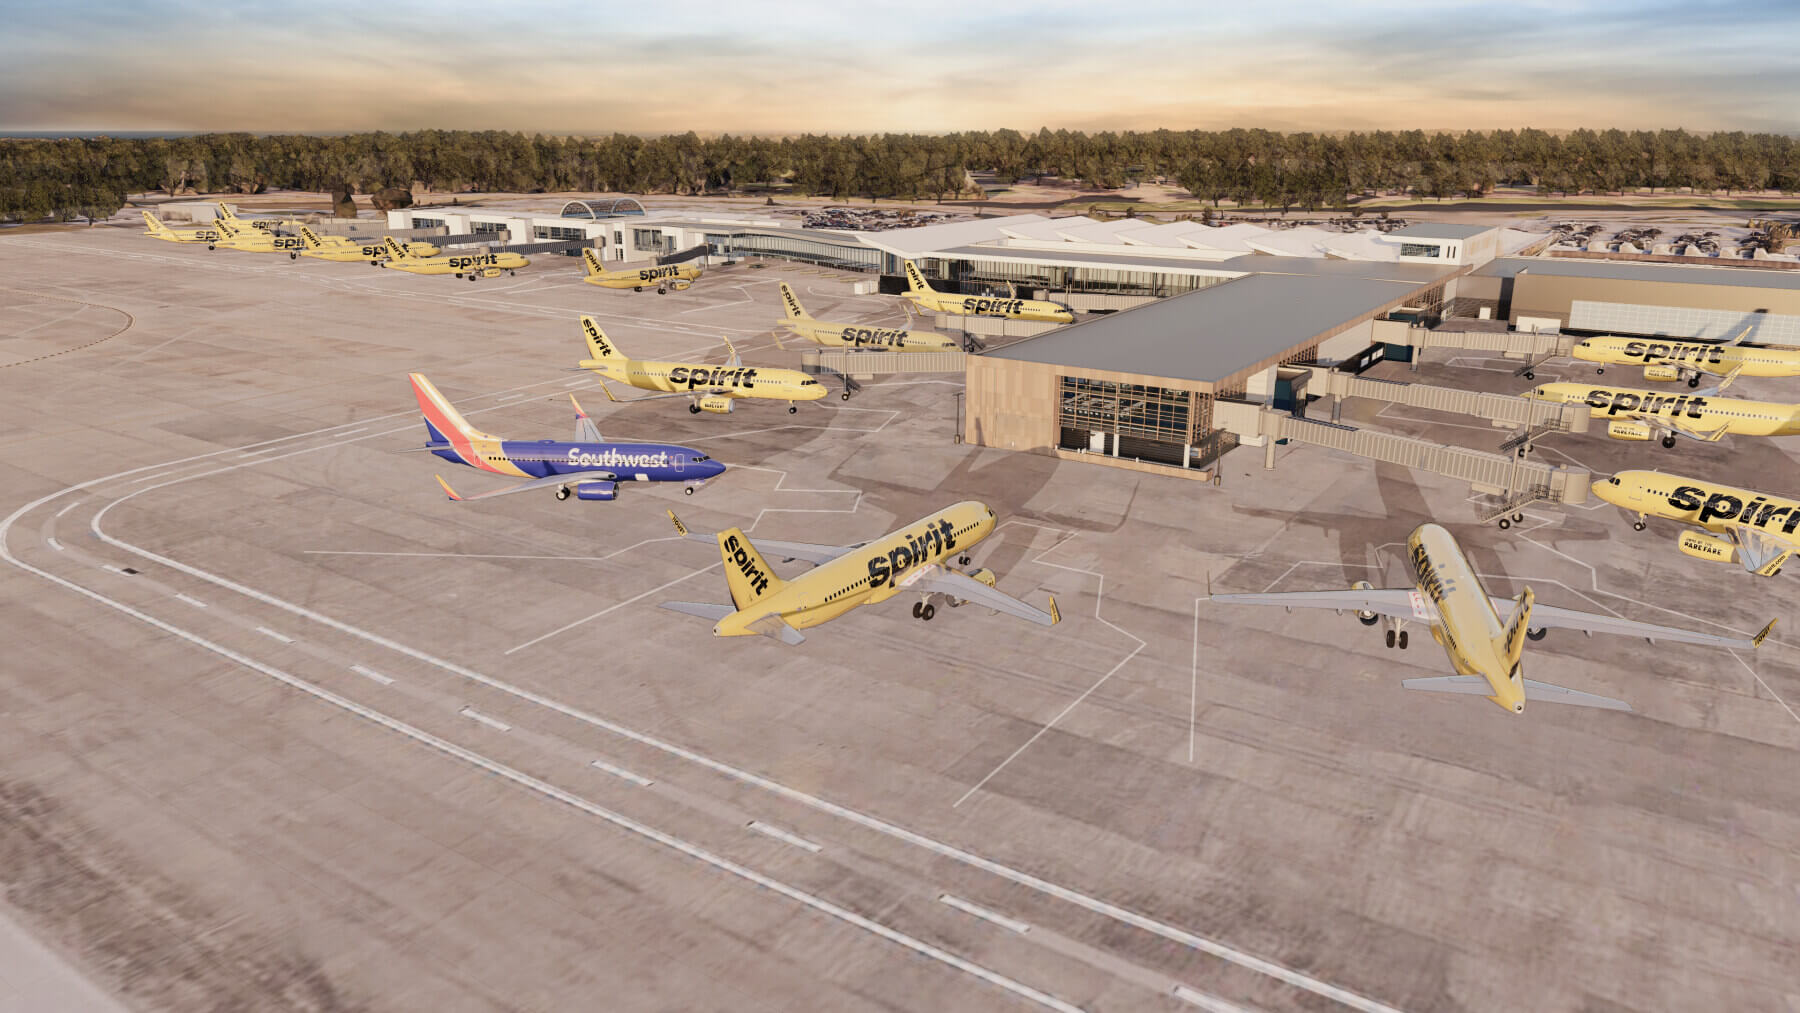 rendering of Concourse A at Myrtle Beach International Airport before the expansion